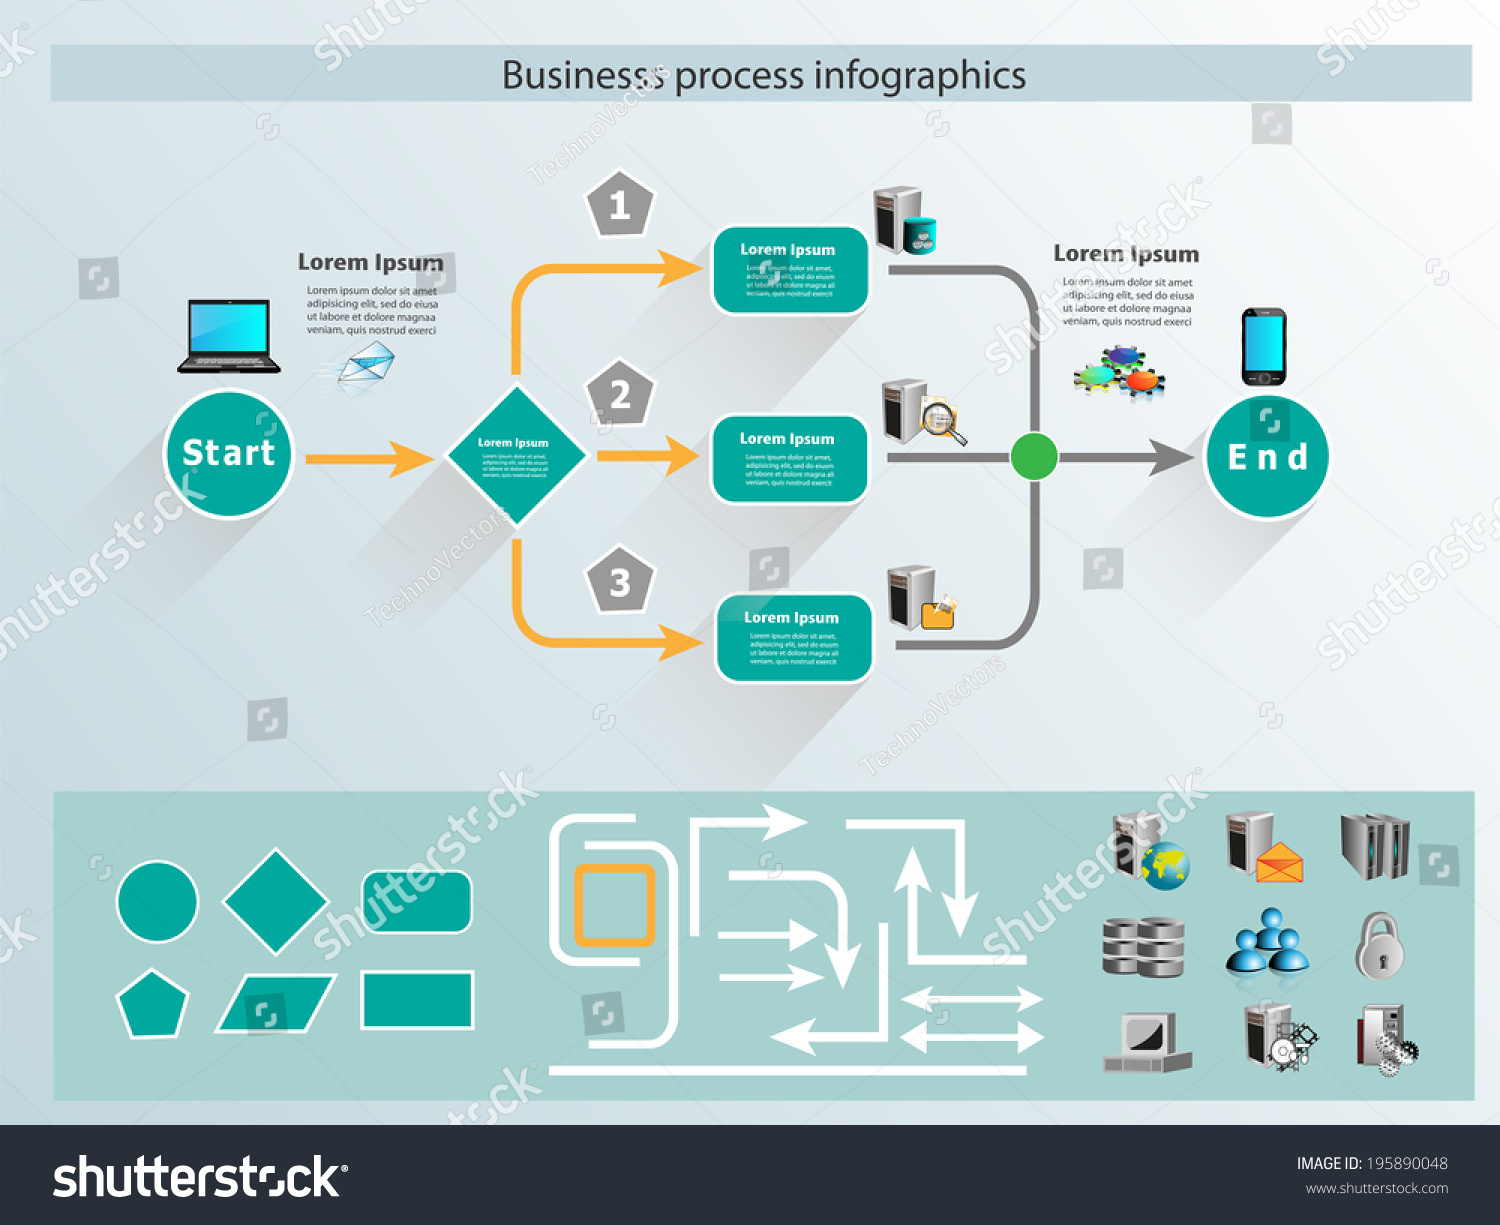 free clipart business process - photo #38